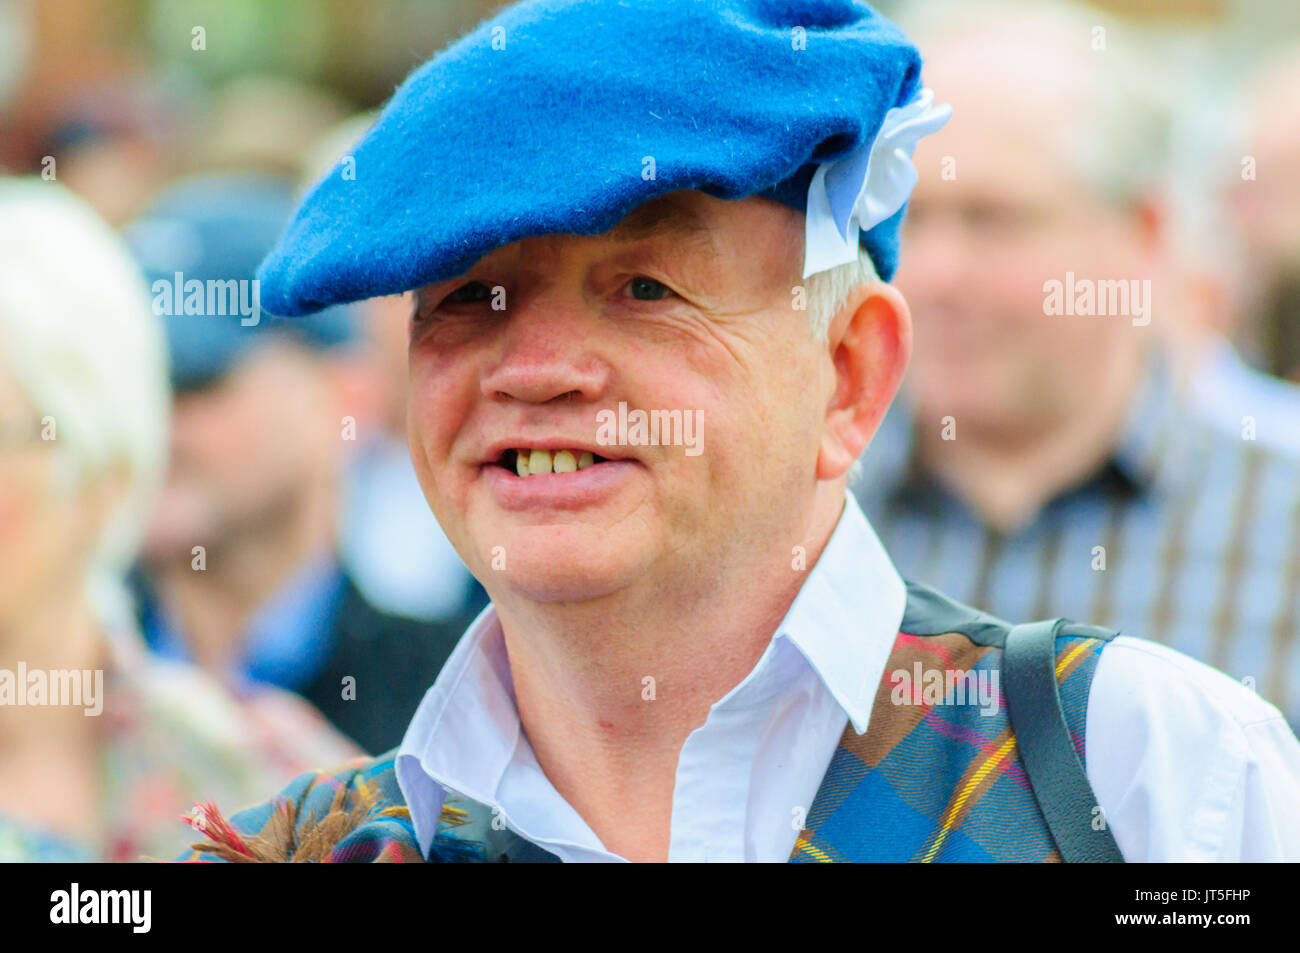 Smiling male wearing a hat celebrates Sma Shot Day in the parade Stock  Photo - Alamy